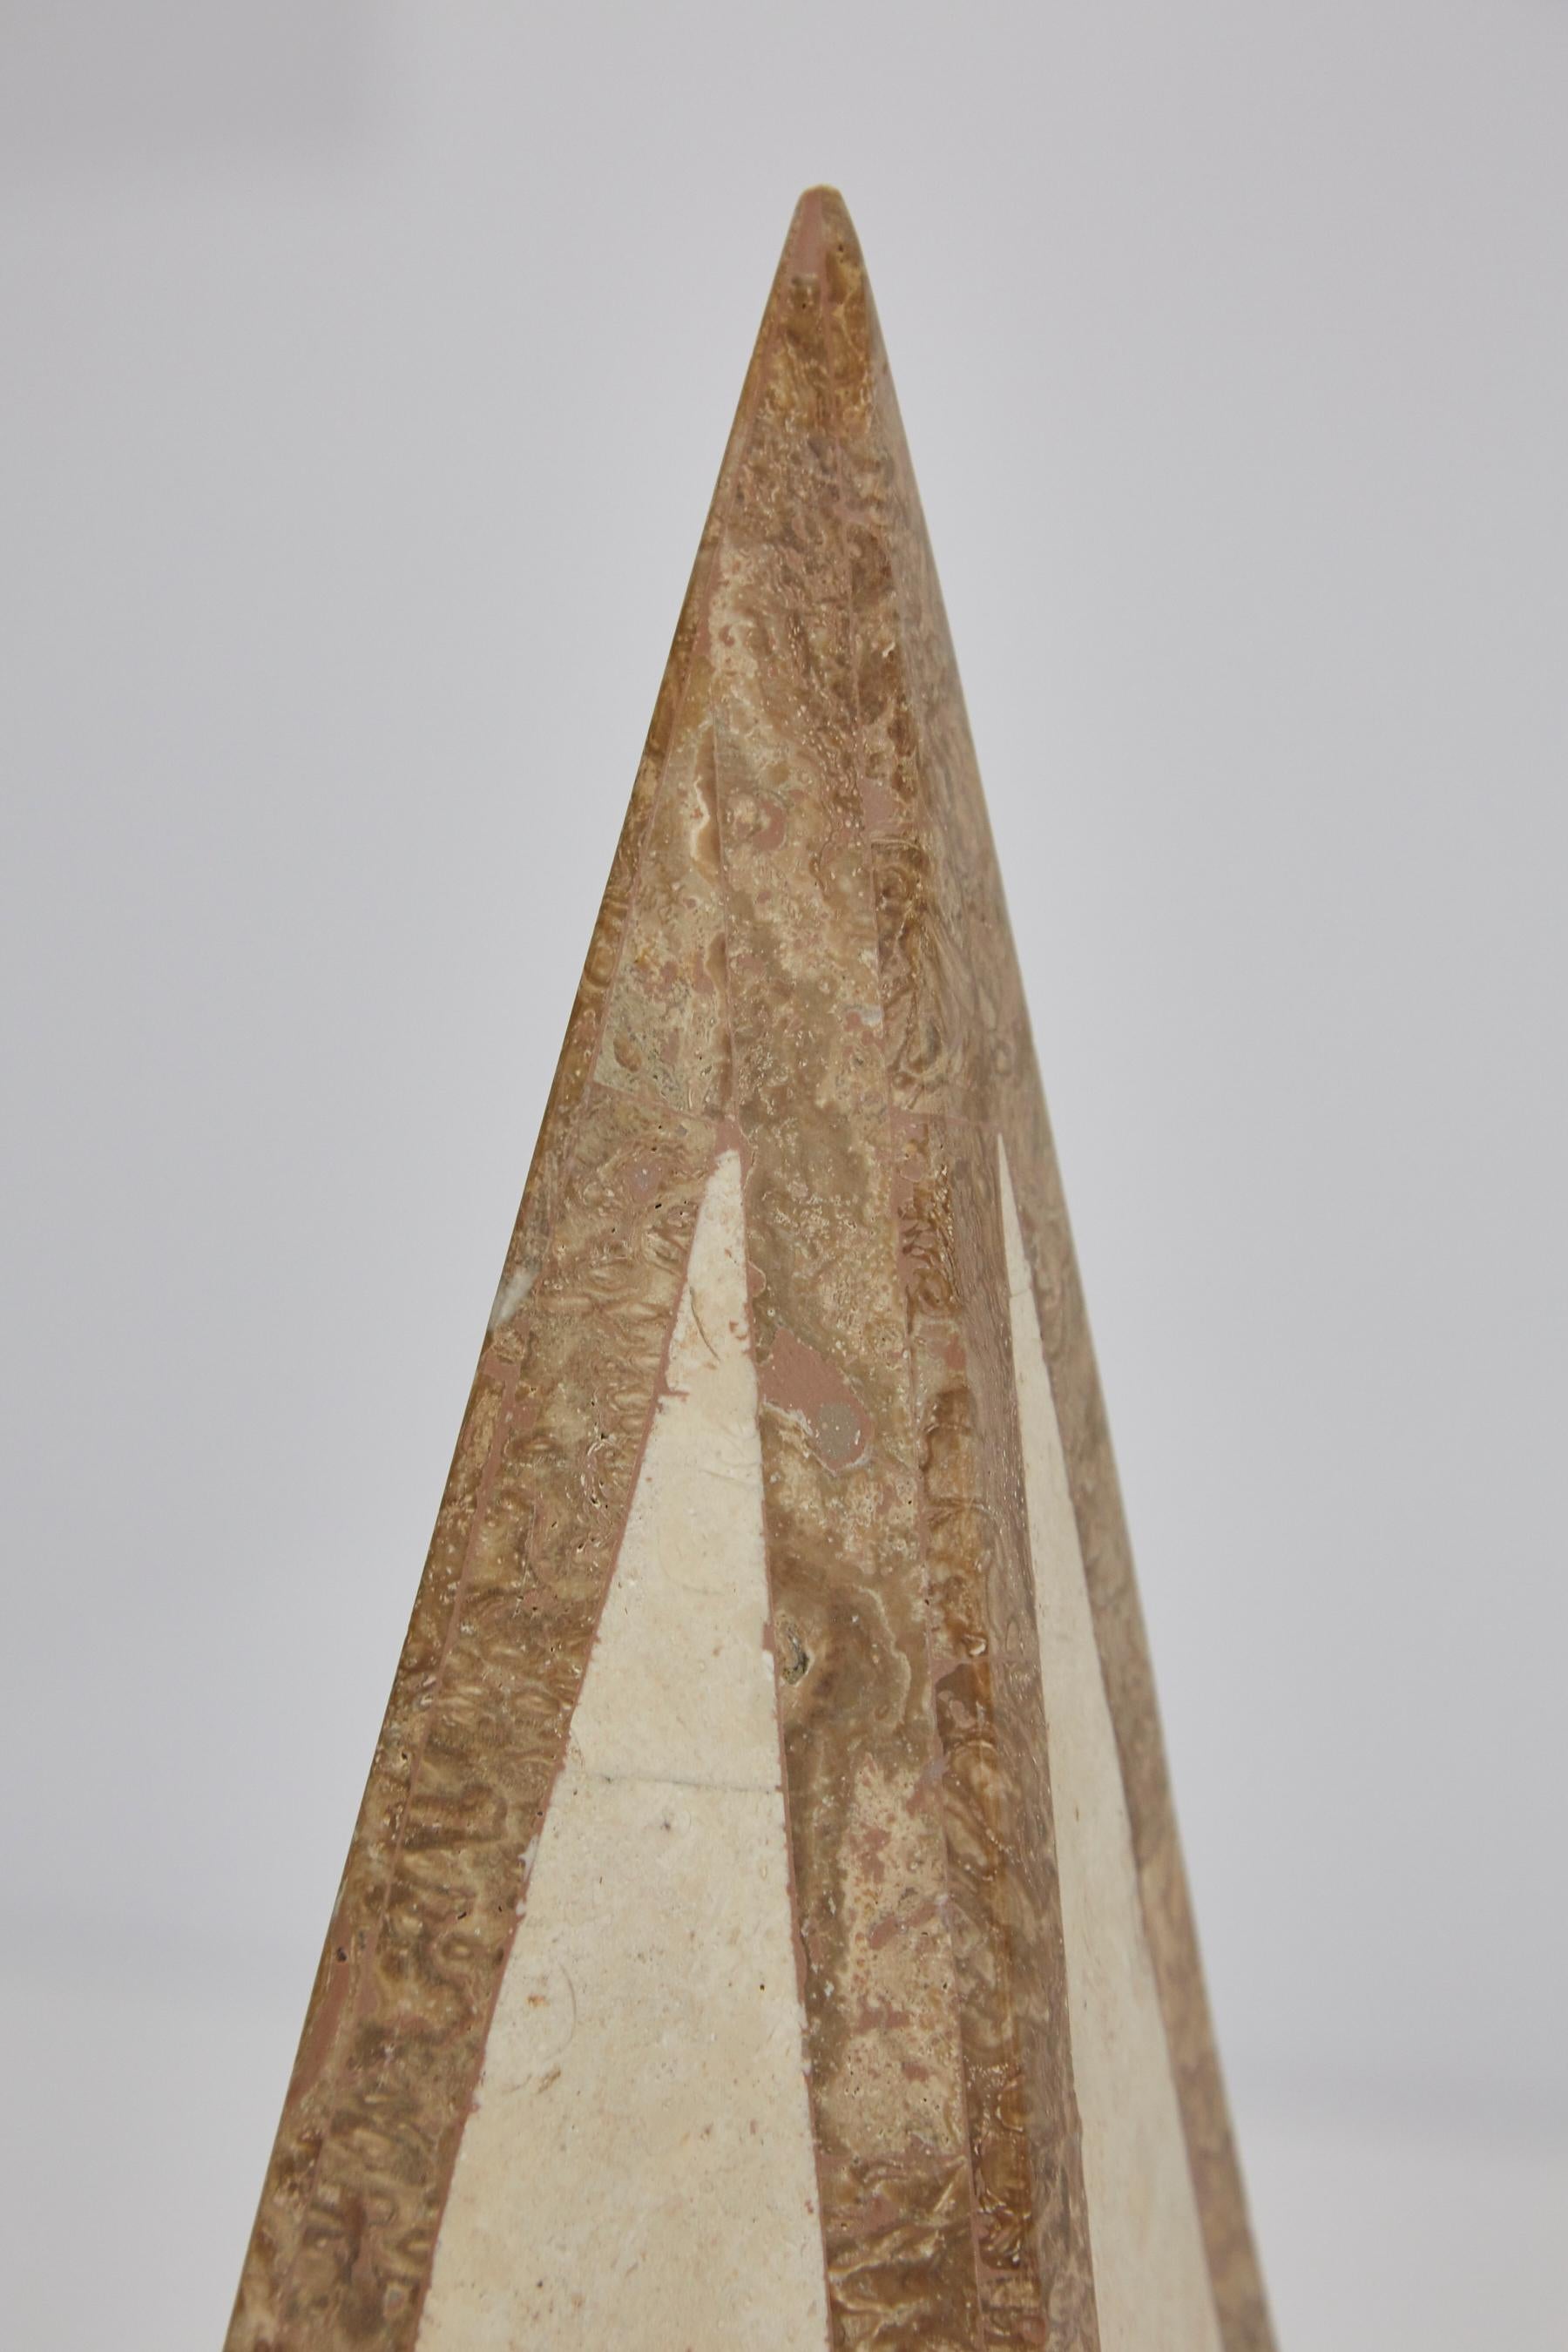 15 in. Tall Decorative Tessellated Stone Pyramid, 1990s For Sale 3